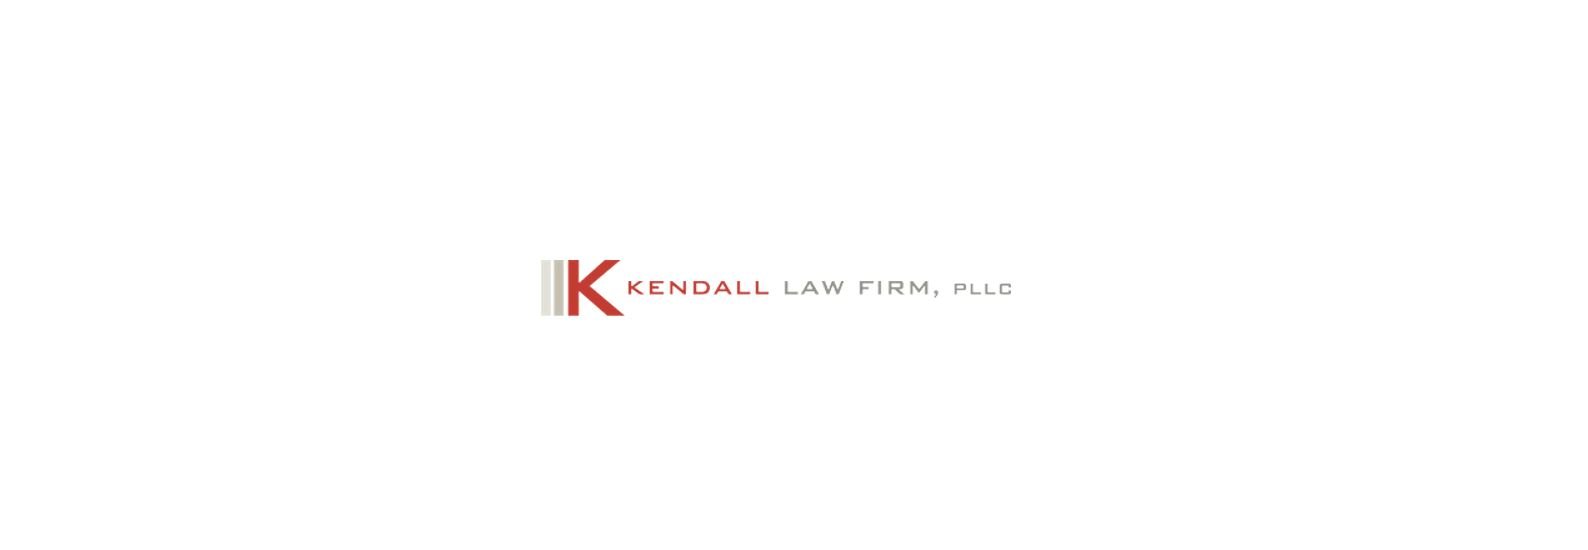 Kendall Law Firm, PLLC cover photo